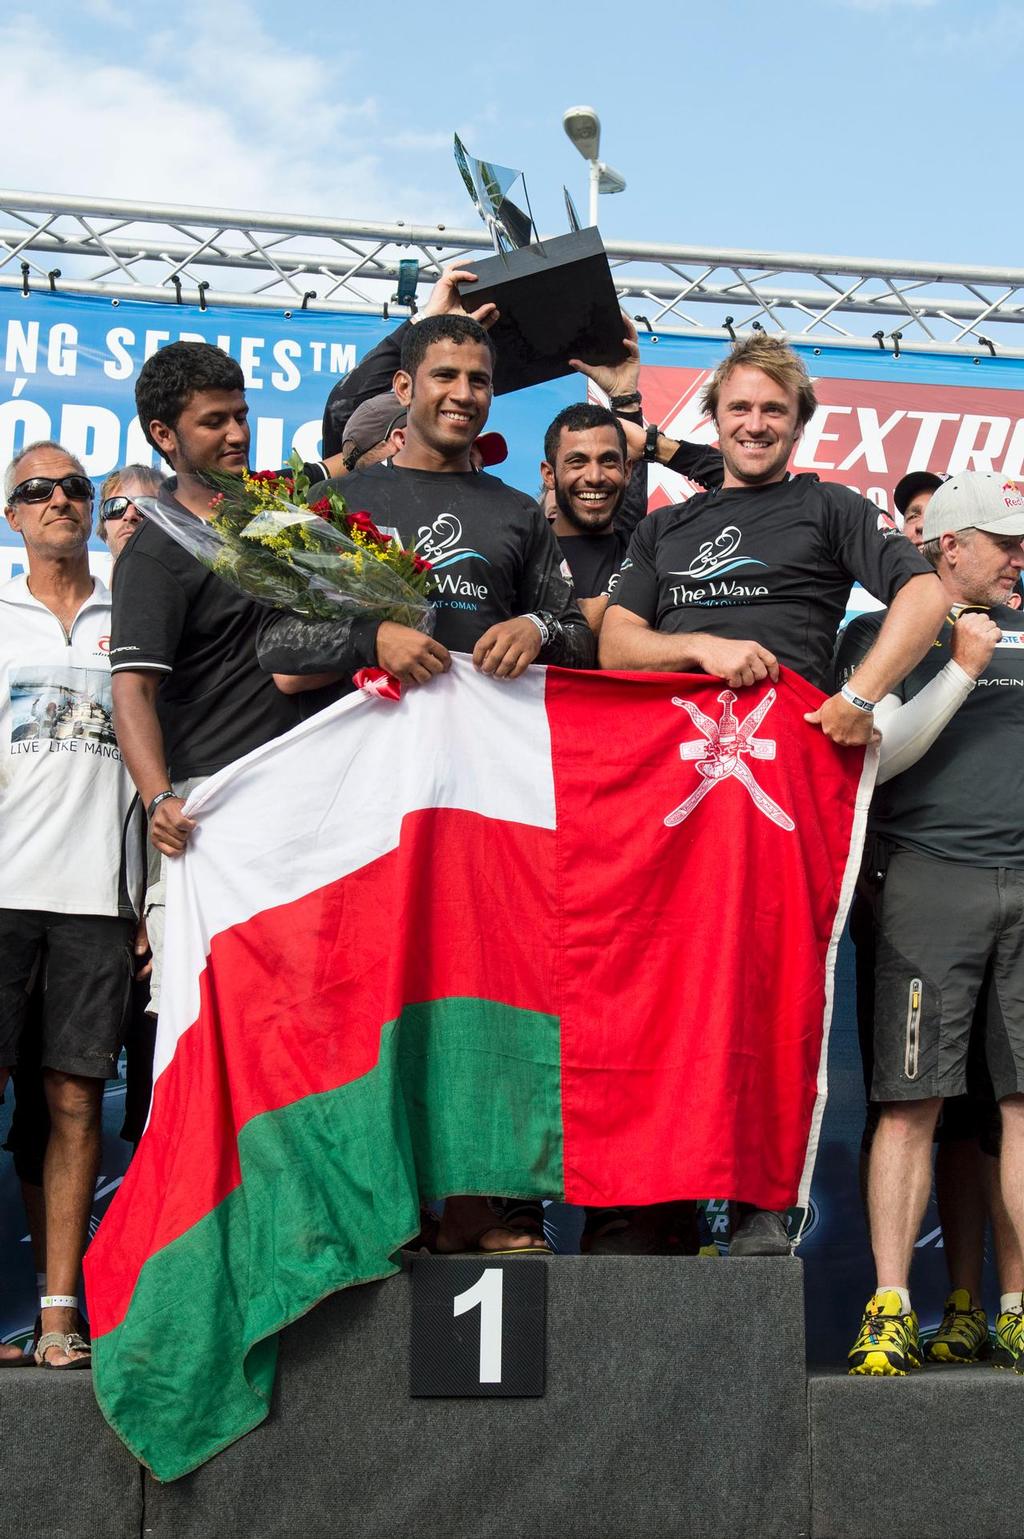 Extreme Sailing Series Act 8 - The Wave Muscat skippered by Leigh McMillan (GBR), mainsail trimmer Pete Greenhalgh (GBR), headsail trimmer Musab Al Hadi (OMA), tactician Ed Smyth (NZL) and bowman Hashim Al Rashdi (OMA)
Winner photo copyright  Vincent Curutchet / Lloyd images / OC http://www.lloydimages.com/ taken at  and featuring the  class